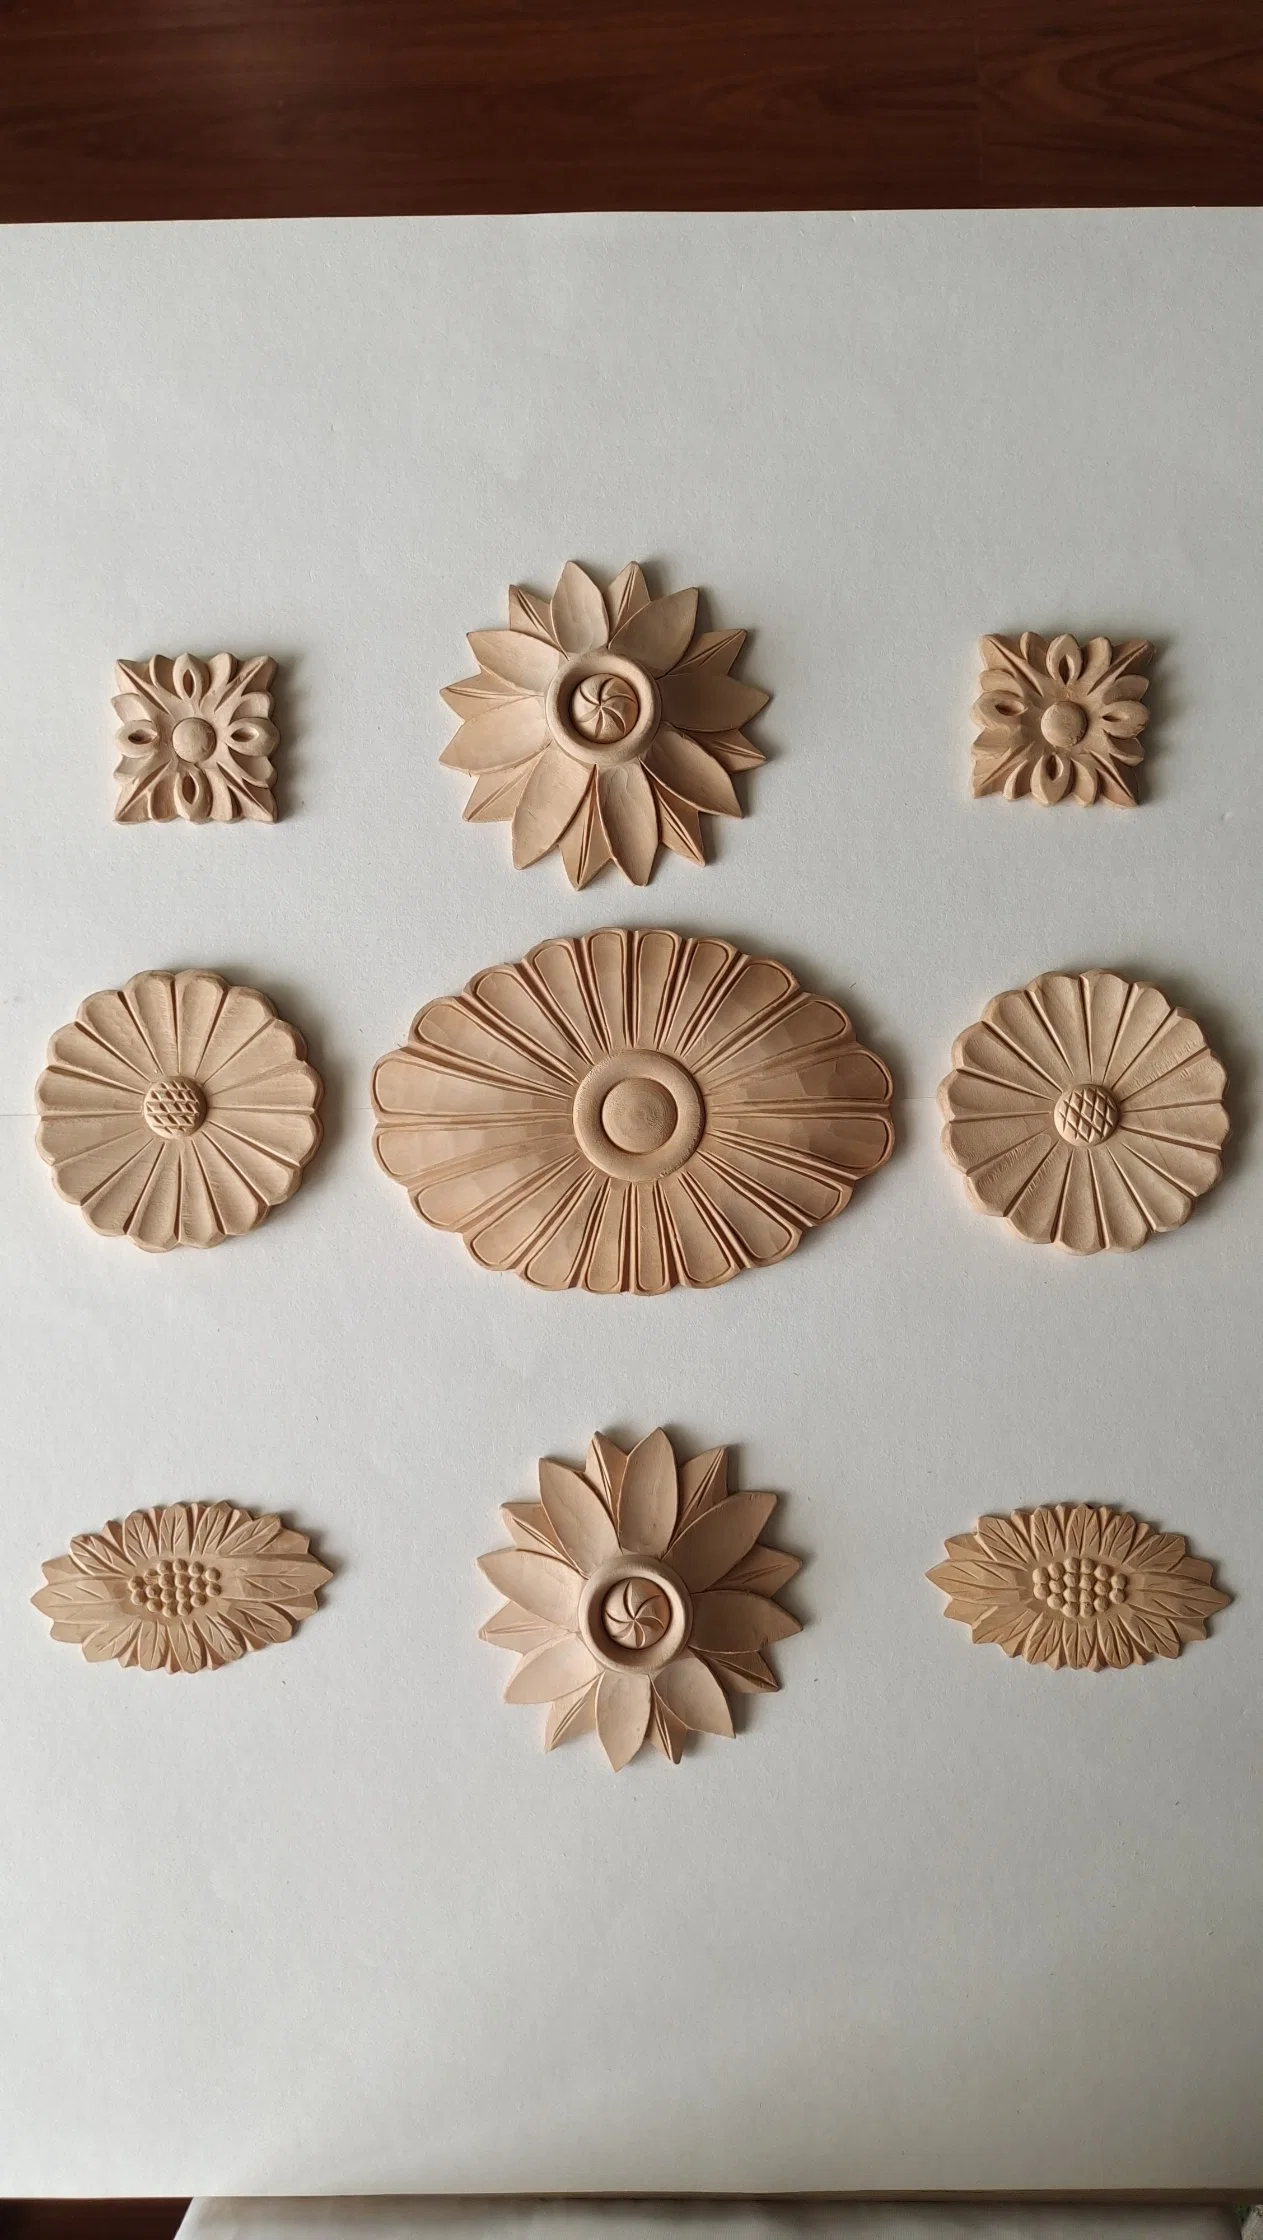 Furniture Interior Decoration Wood Applique Carved by CNC and Hand